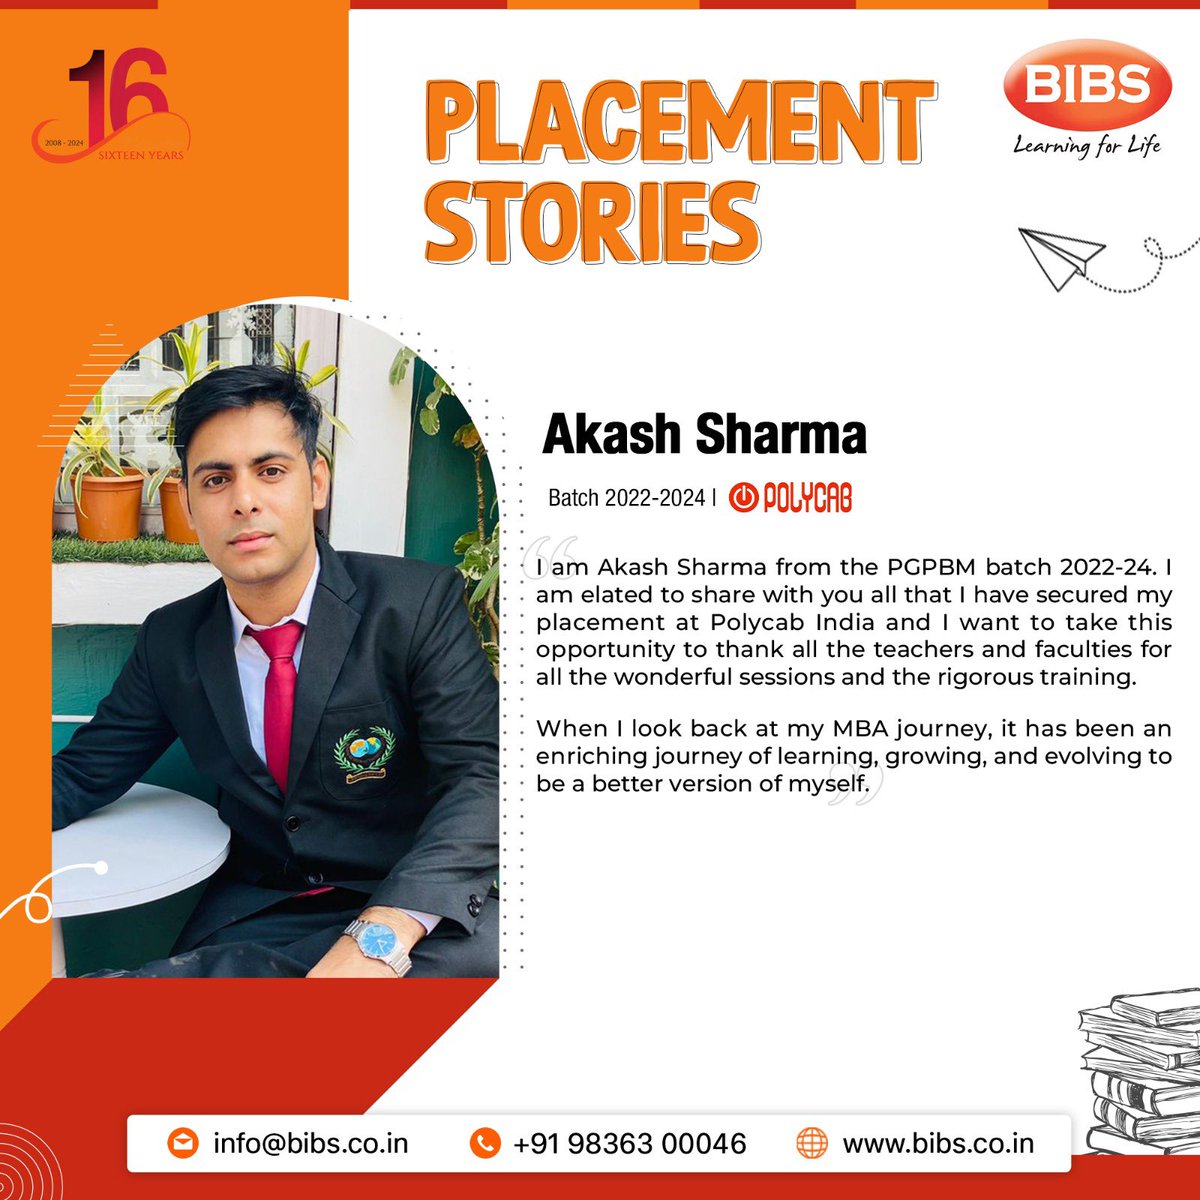 BIBS presents the placement success stories of our student. We congratulate him for his success and hardships.

#successstories #bibs #bibsmba #bibseducation #learning #education #placement #placementstories #studentstories #placementsuccess #recent #bibstudents #bibsplacements